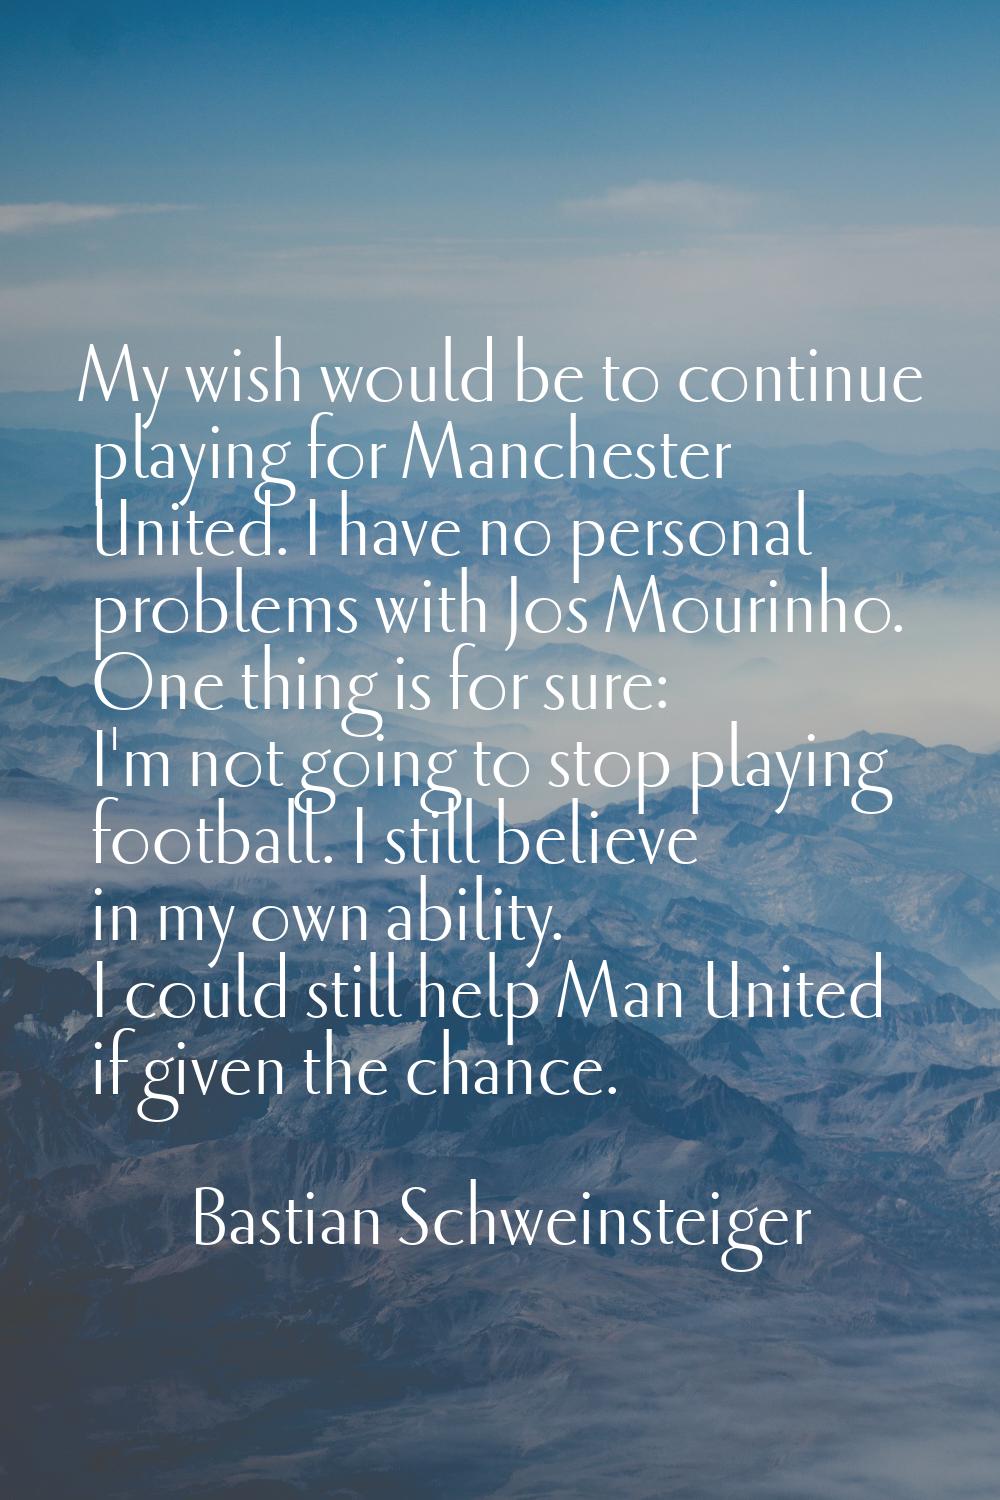 My wish would be to continue playing for Manchester United. I have no personal problems with Jos Mo